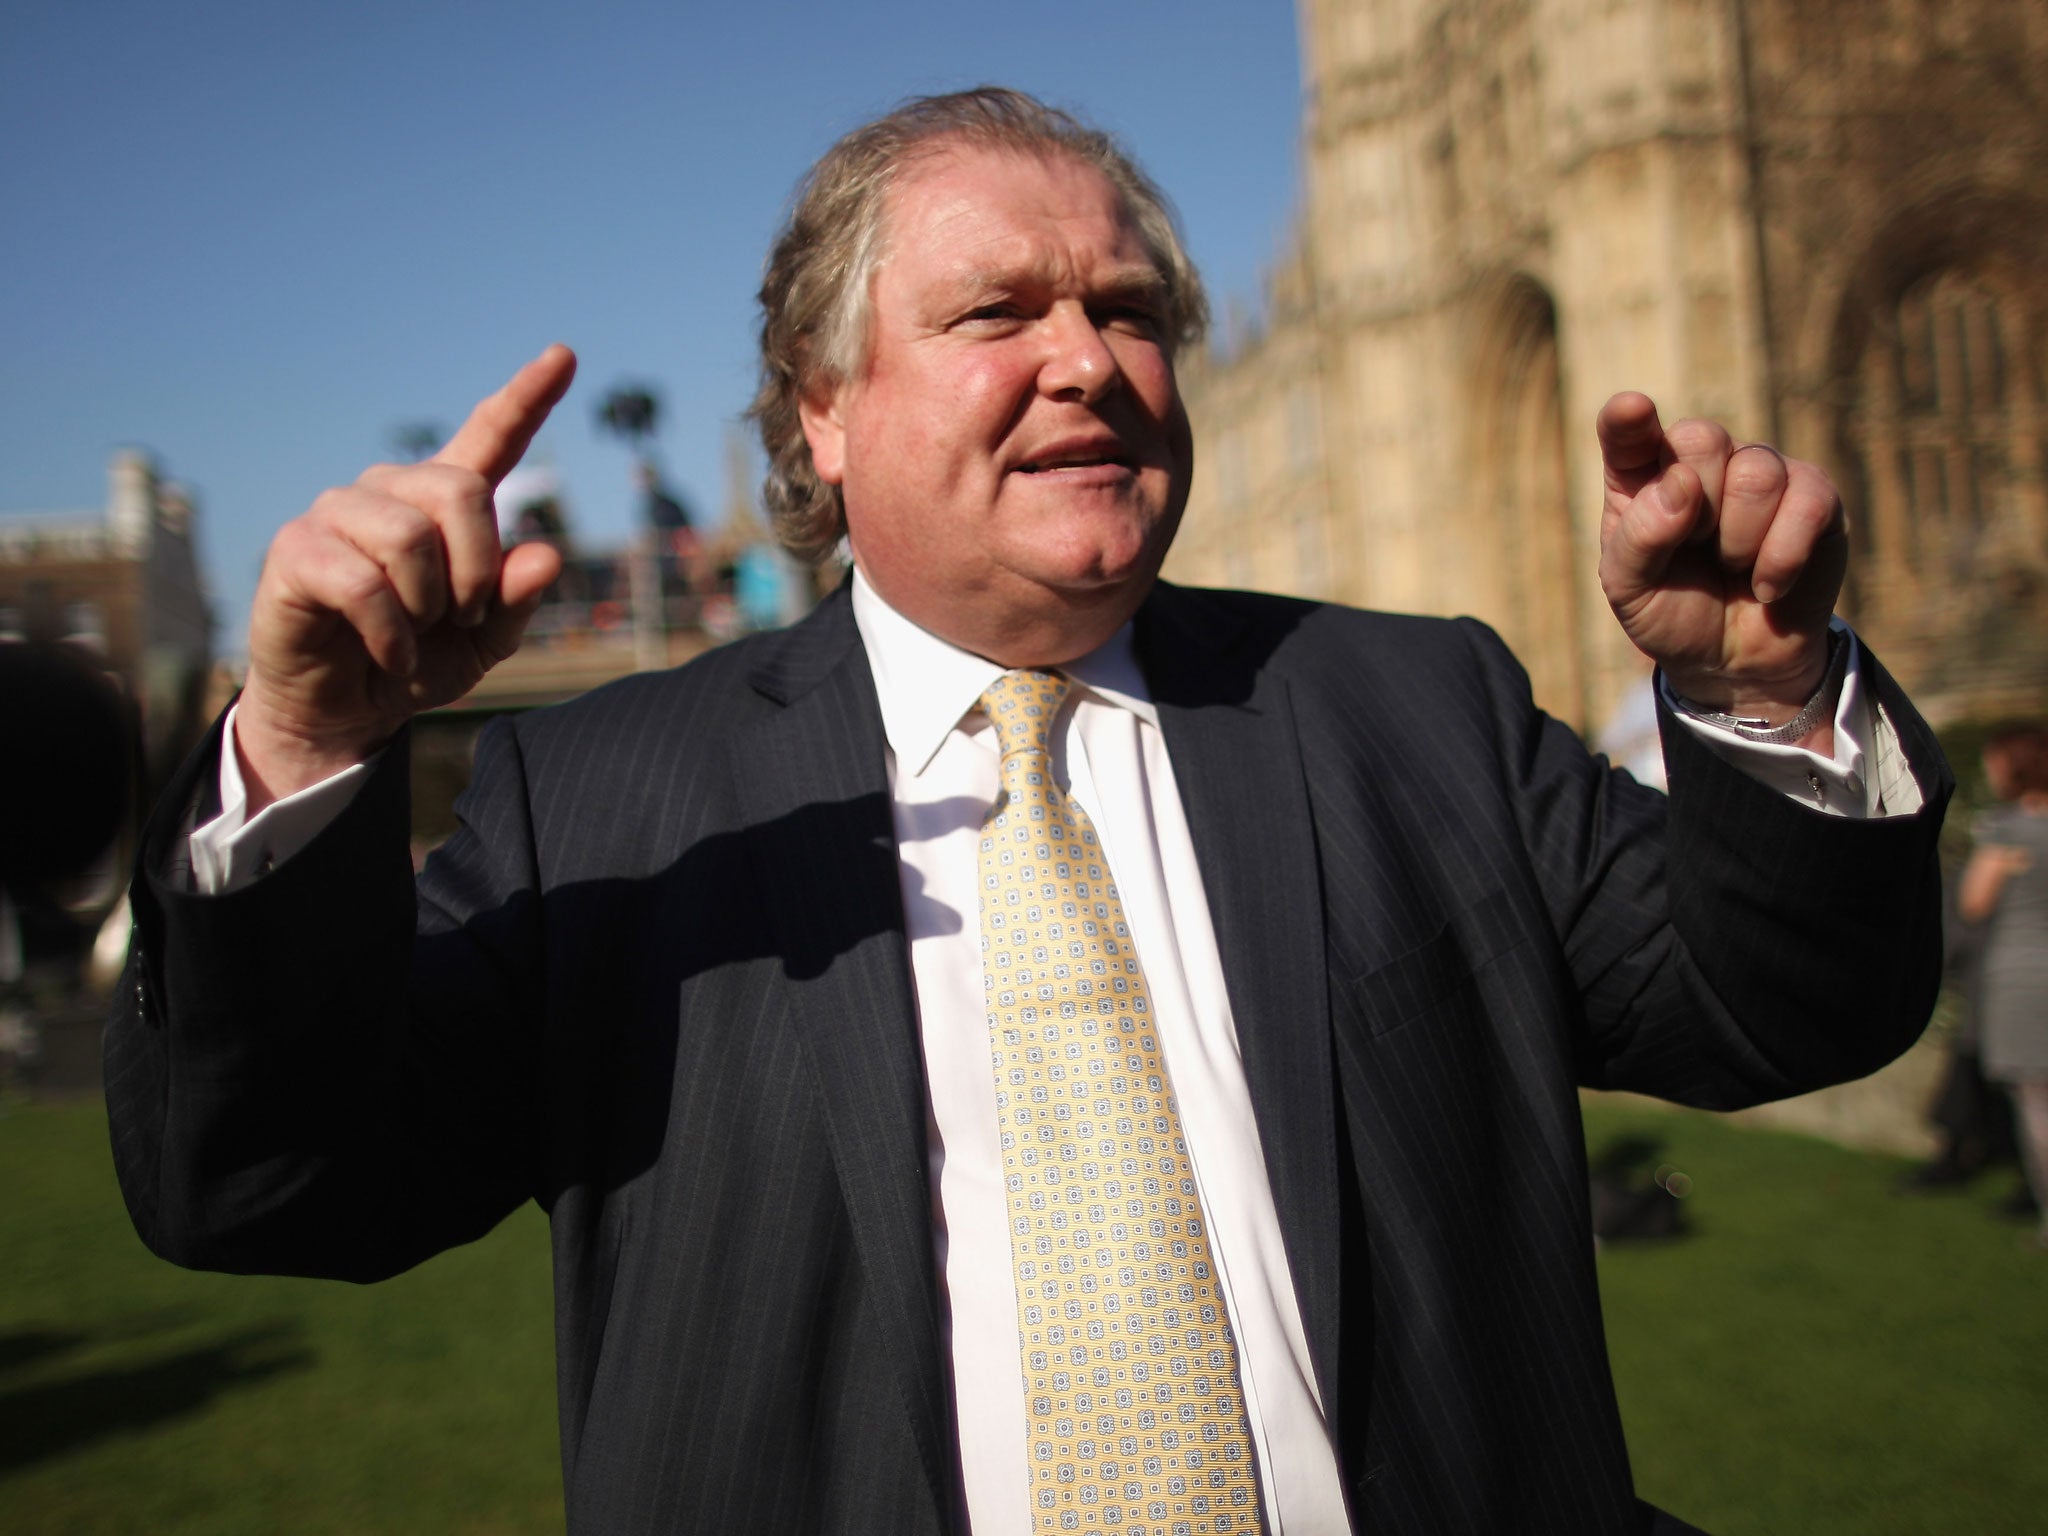 Lord Jones has been unafraid to criticise politicians, including former colleagues from Mr Brown’s Government